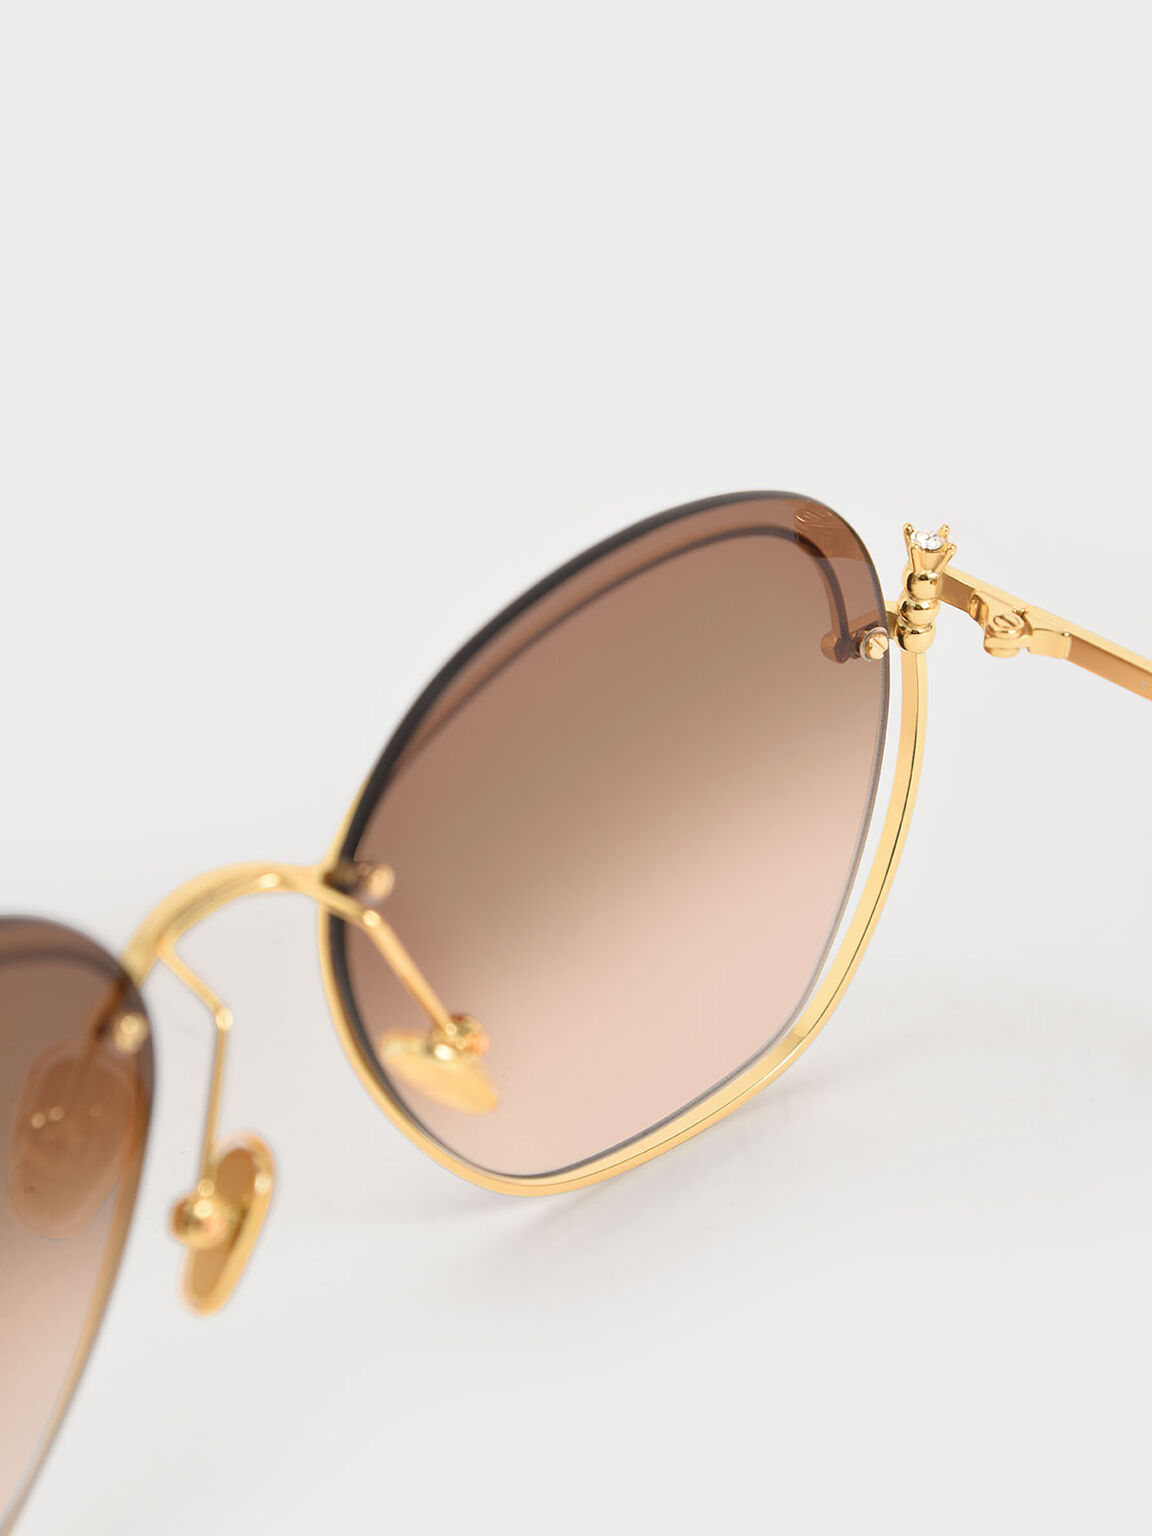 Cut-Out Butterfly Sunglasses, Gold, hi-res